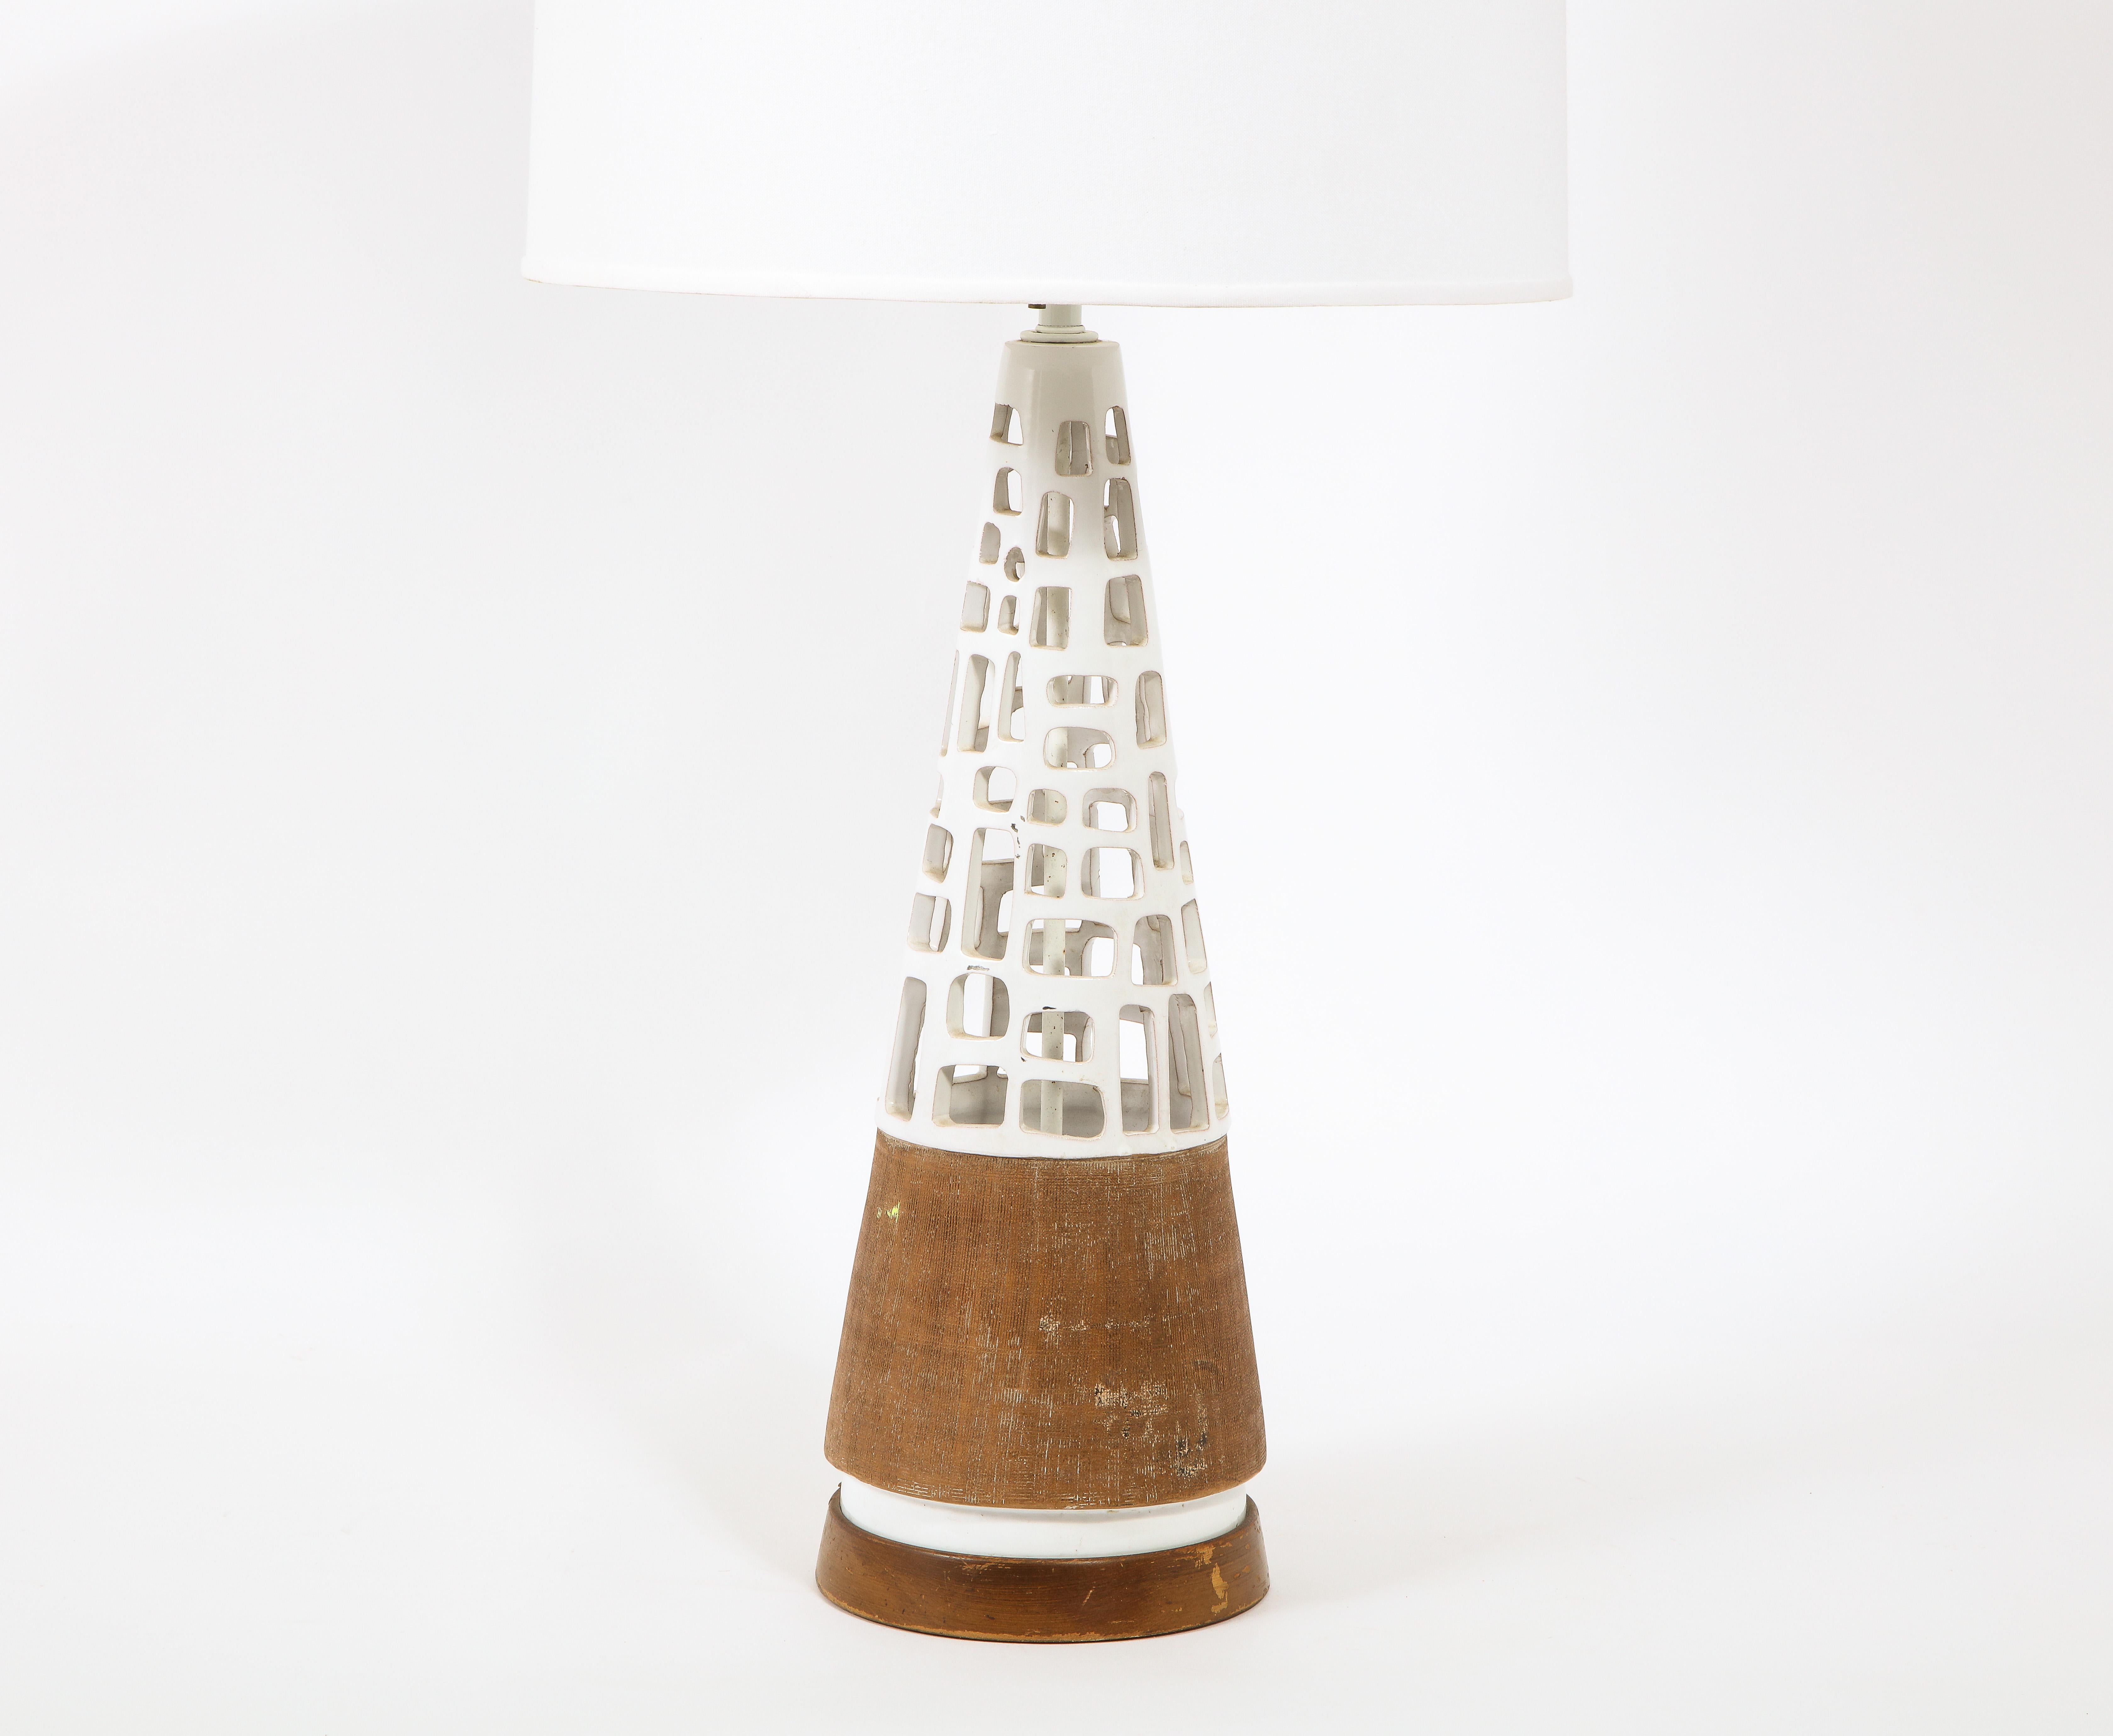 A large pottery table lamp with cut-out walls and dual finishes, part raw pottery, part white glazing, with a matching finial. Rewired

Shade not included.